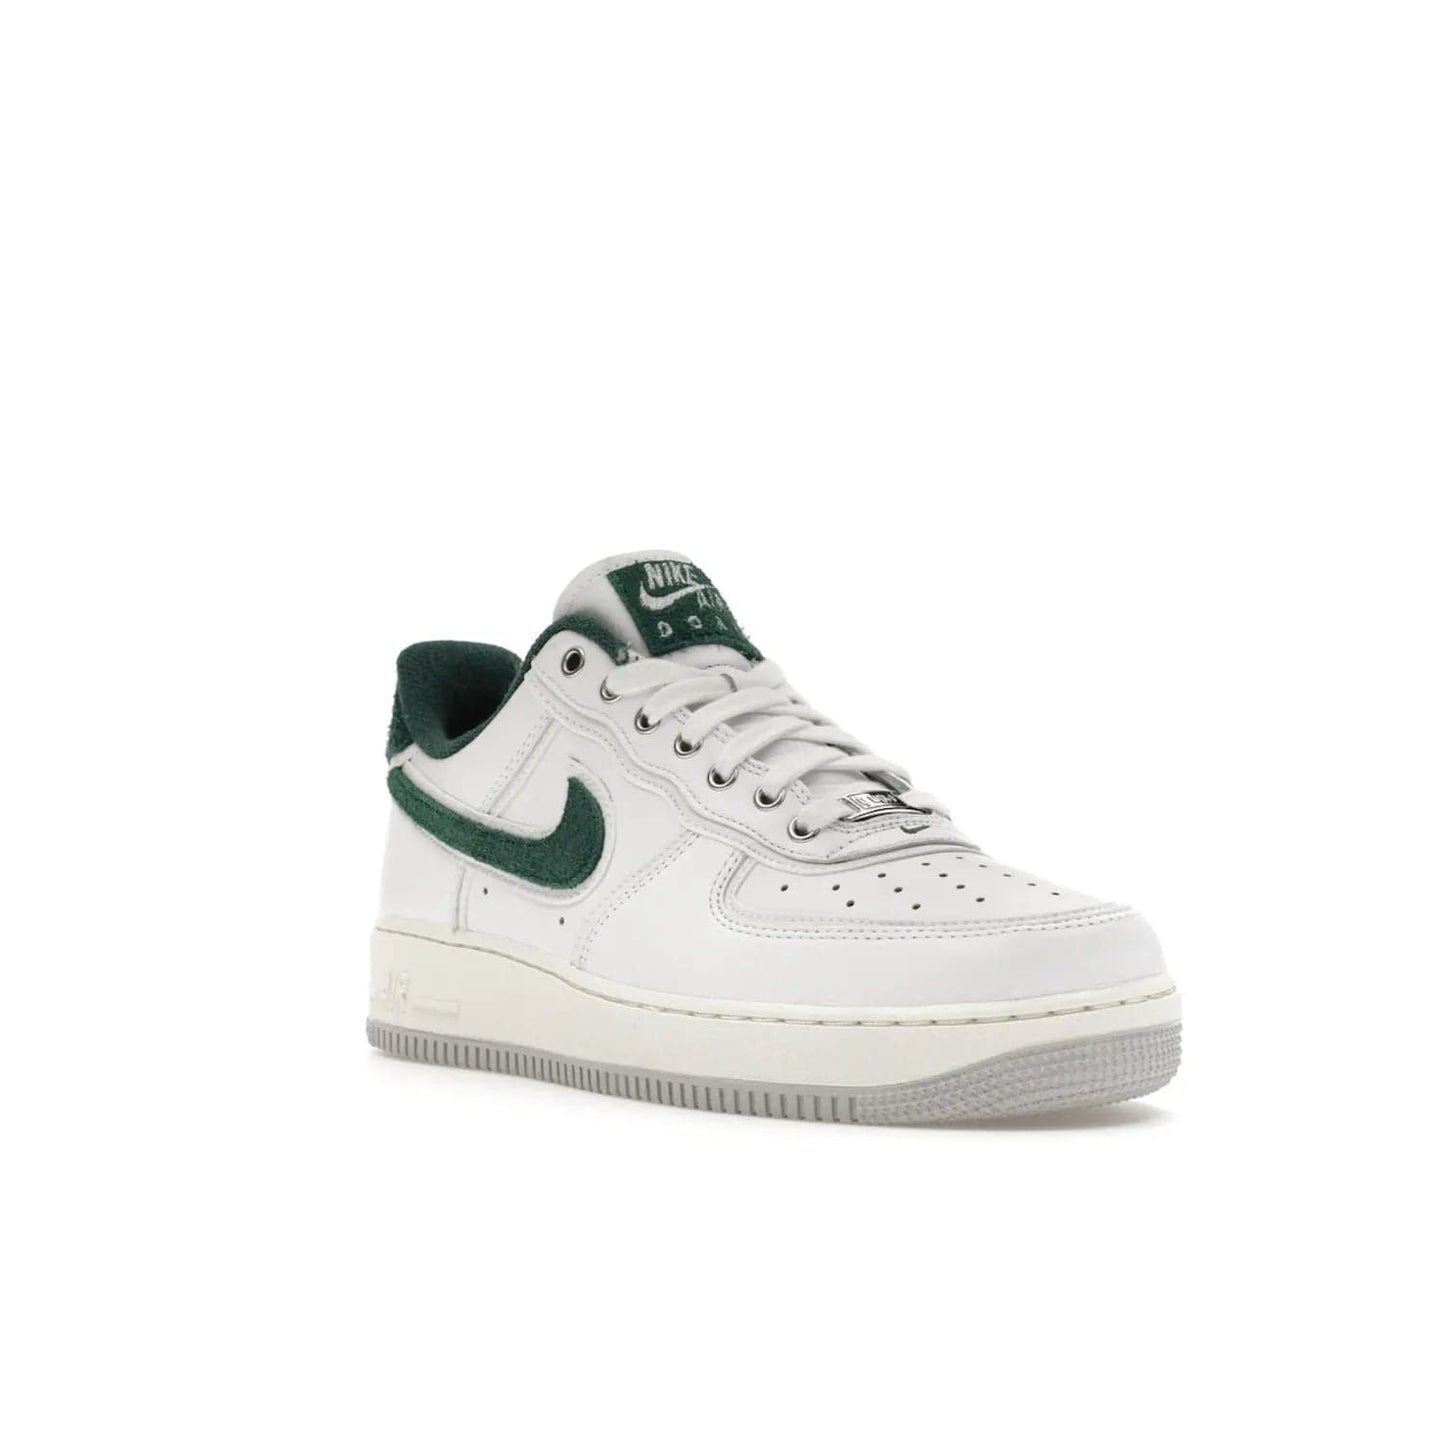 Nike Air Force 1 Low '07 Premium University of Oregon PE - Image 6 - Only at www.BallersClubKickz.com - The Nike Air Force 1 Low '07 Premium. Special Oregon University colorway. White base with green and sail accents. Cushioned rubber midsole. Comfort and style. Support your school!